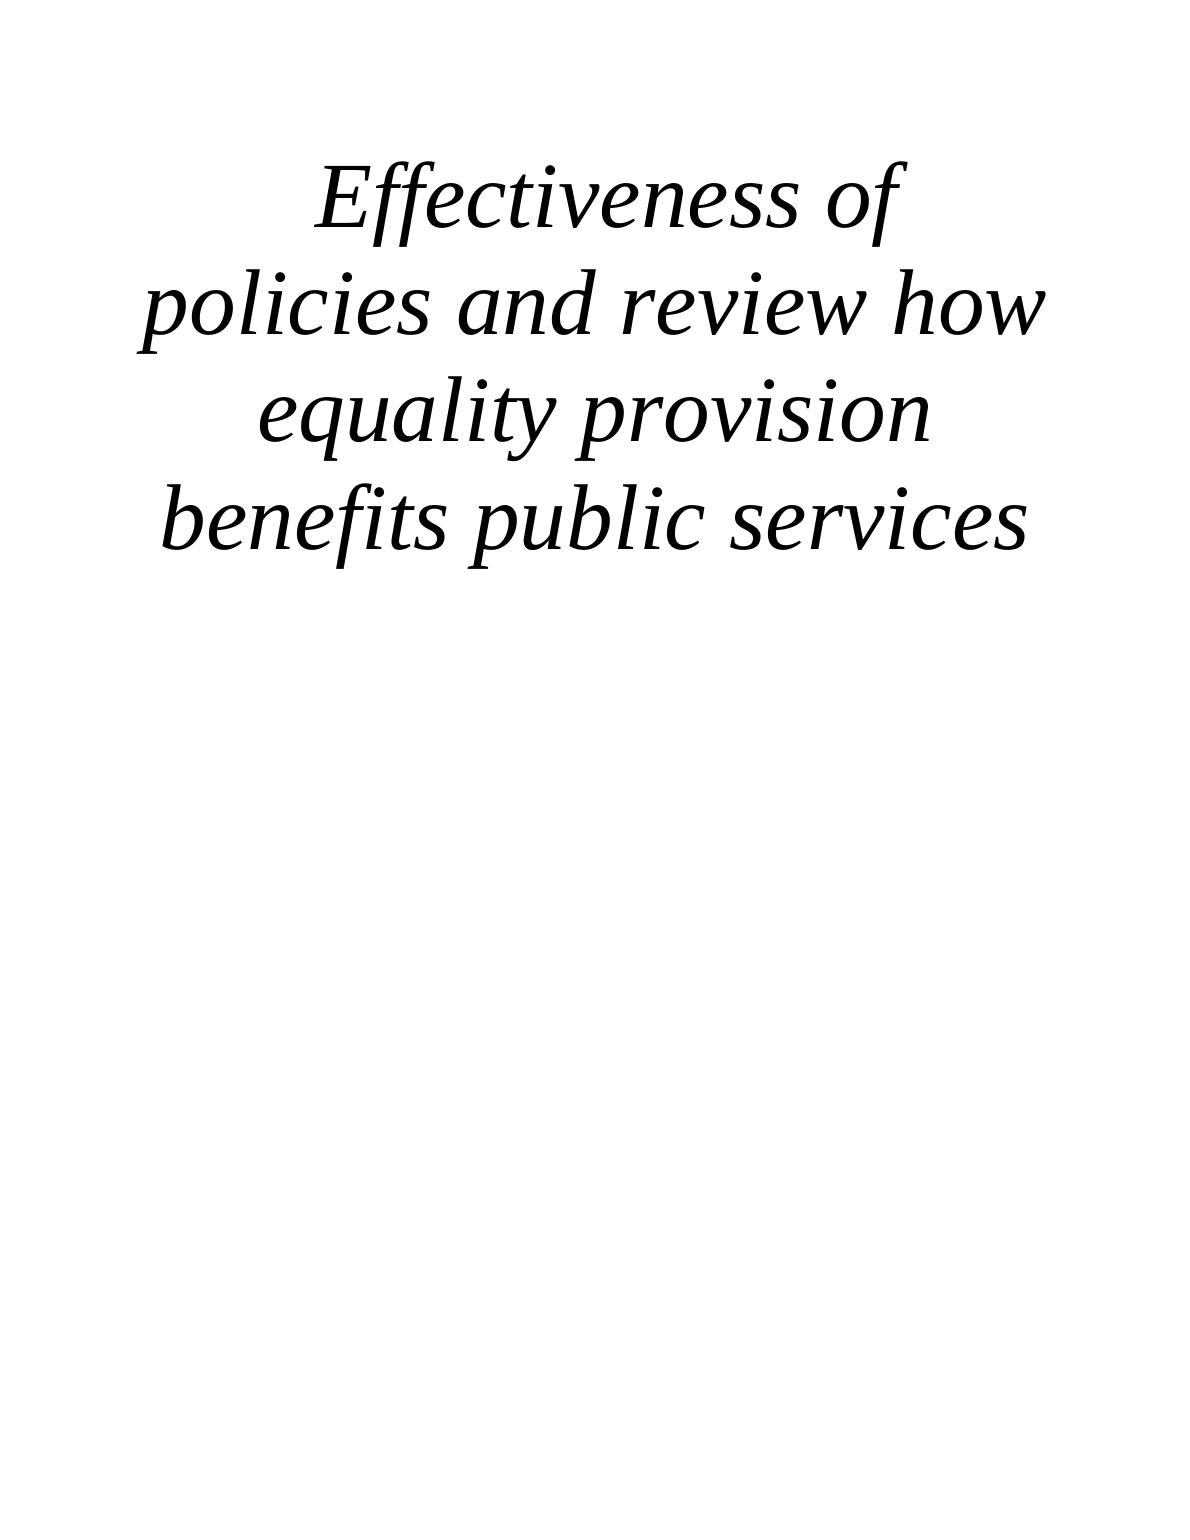 [PDF] Equality and diversity policies and practices at workplace_1